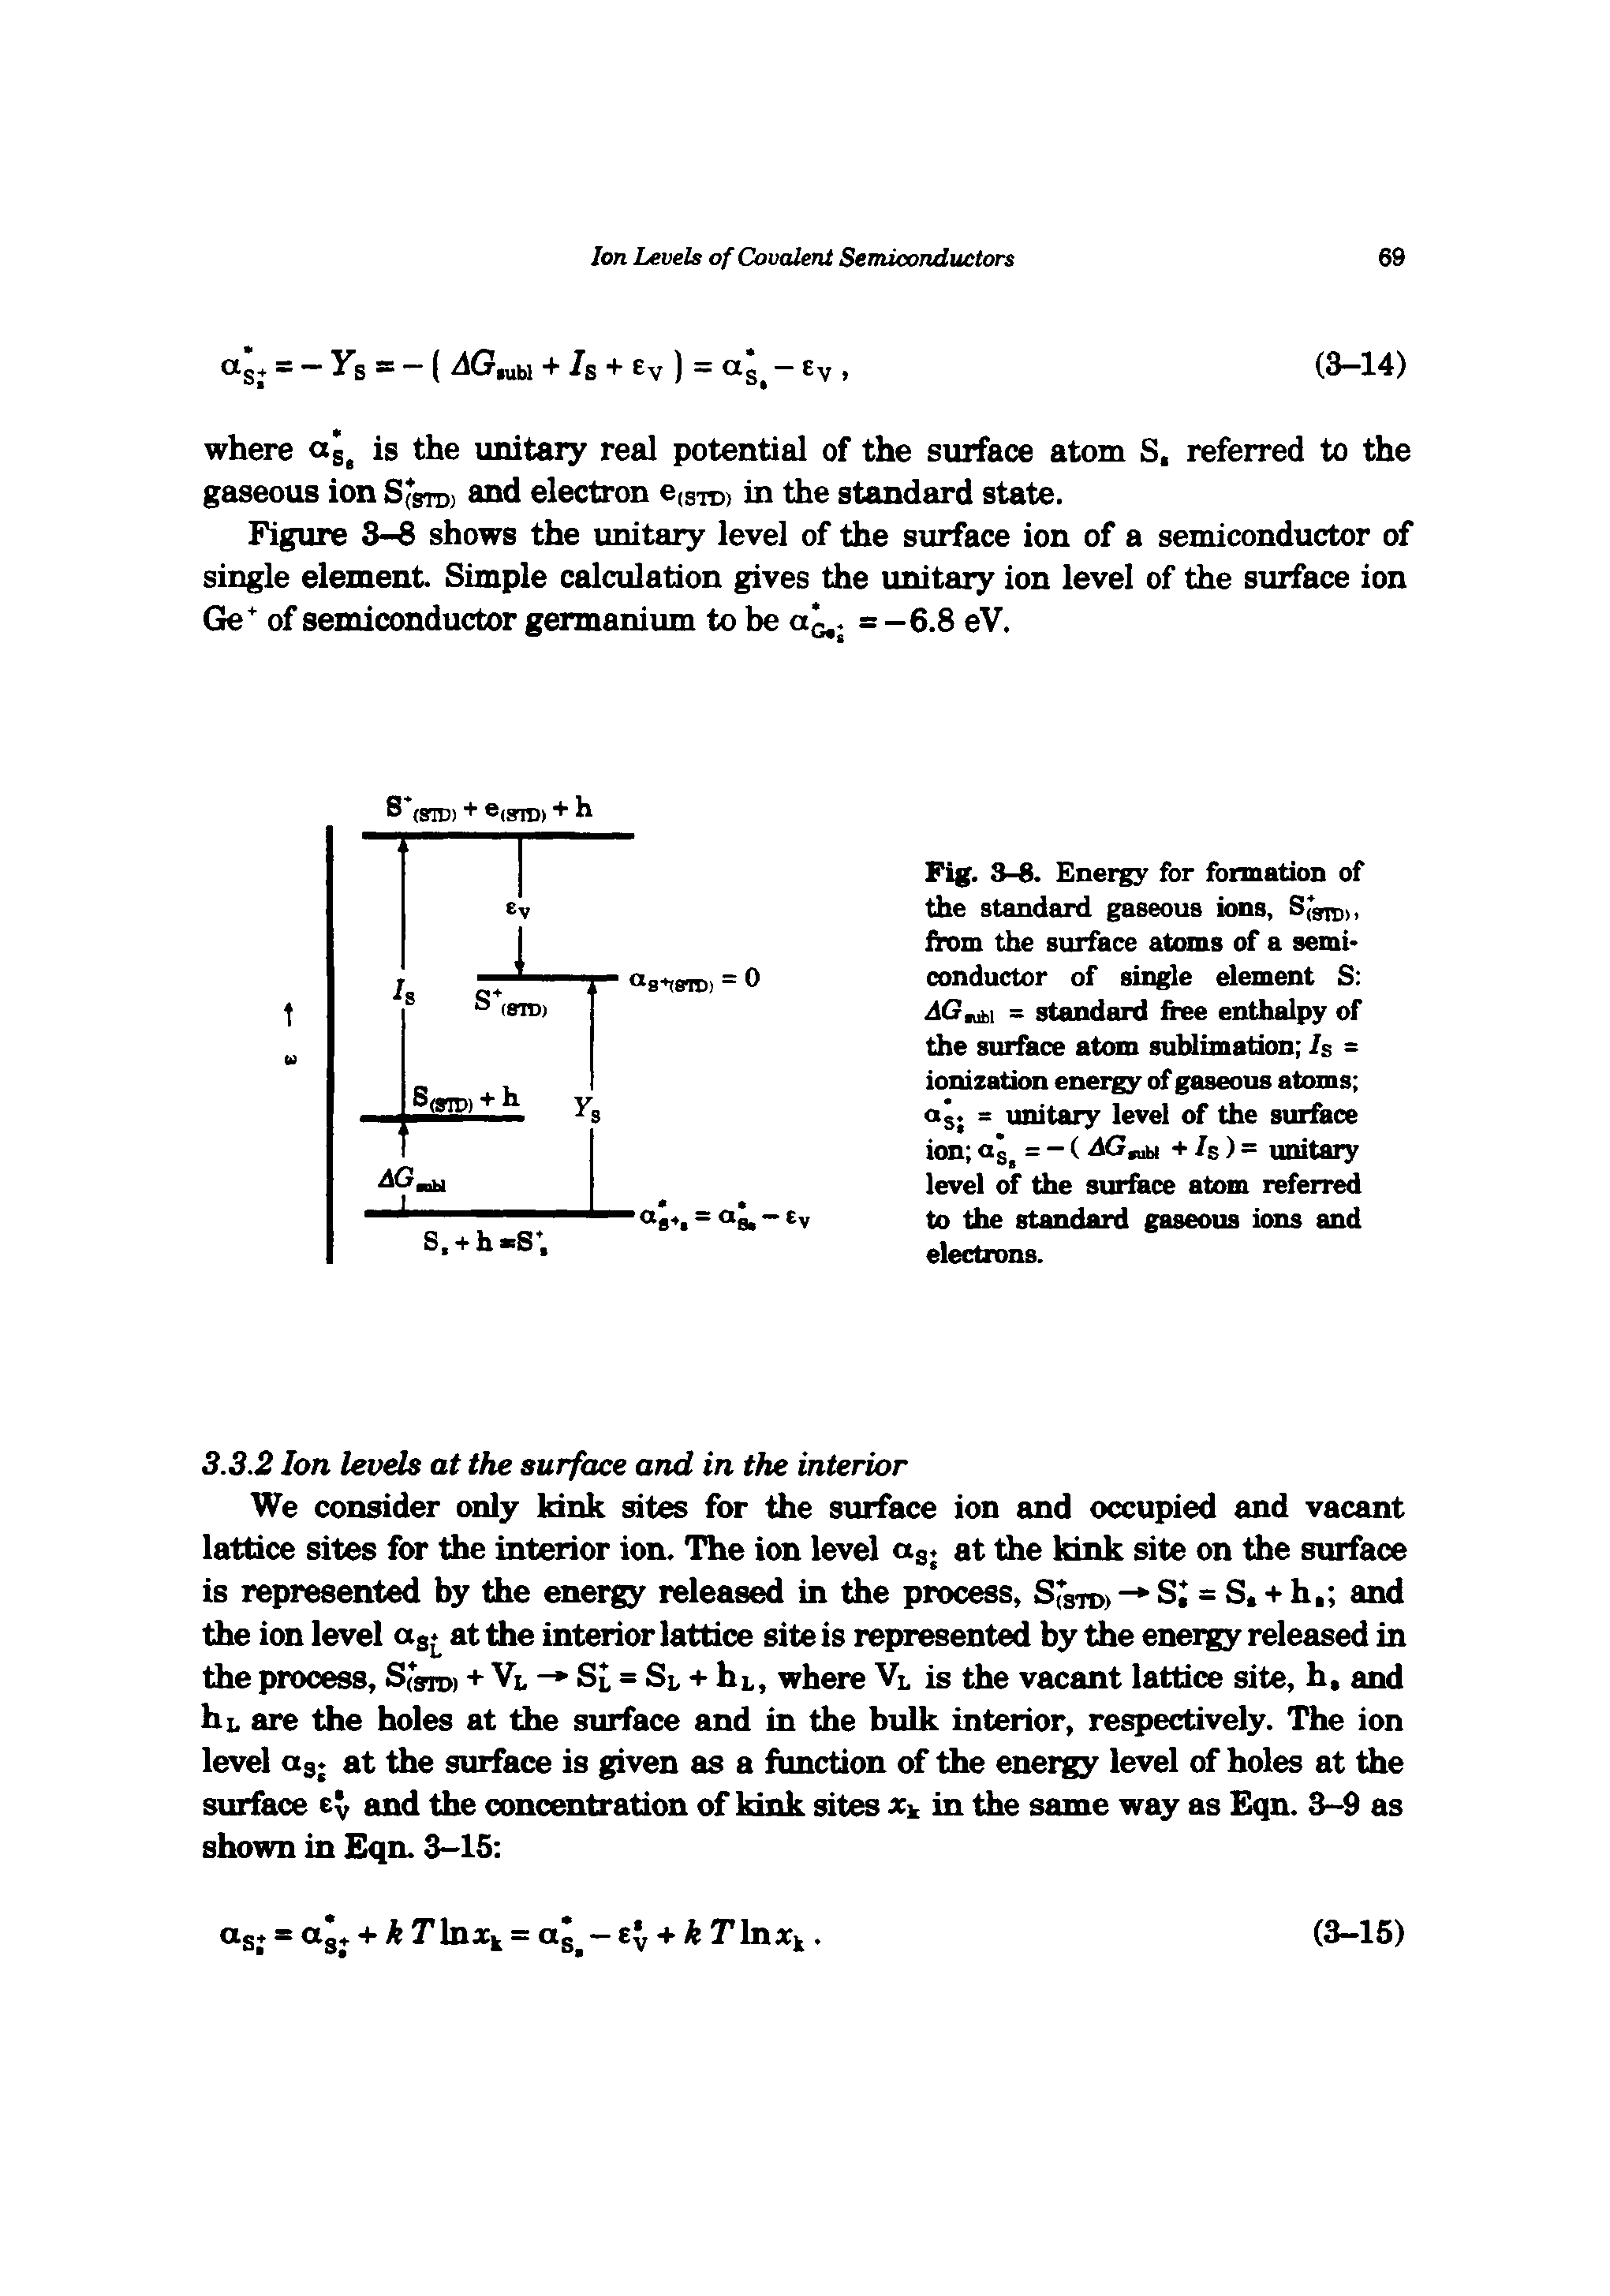 Fig. 3-8. Energy for formation of the standard gaseous ions, S(Vnj), from the surface atoms of a semiconductor of single element S dGnbi = standard free enthalpy of the surface atom sublimation h = ionization energy of gaseous atoms aj. = unitary level of the surface ion = - (dGsM + /s) = unitary level of the surface atom referred to the standard gaseous ions and elections.